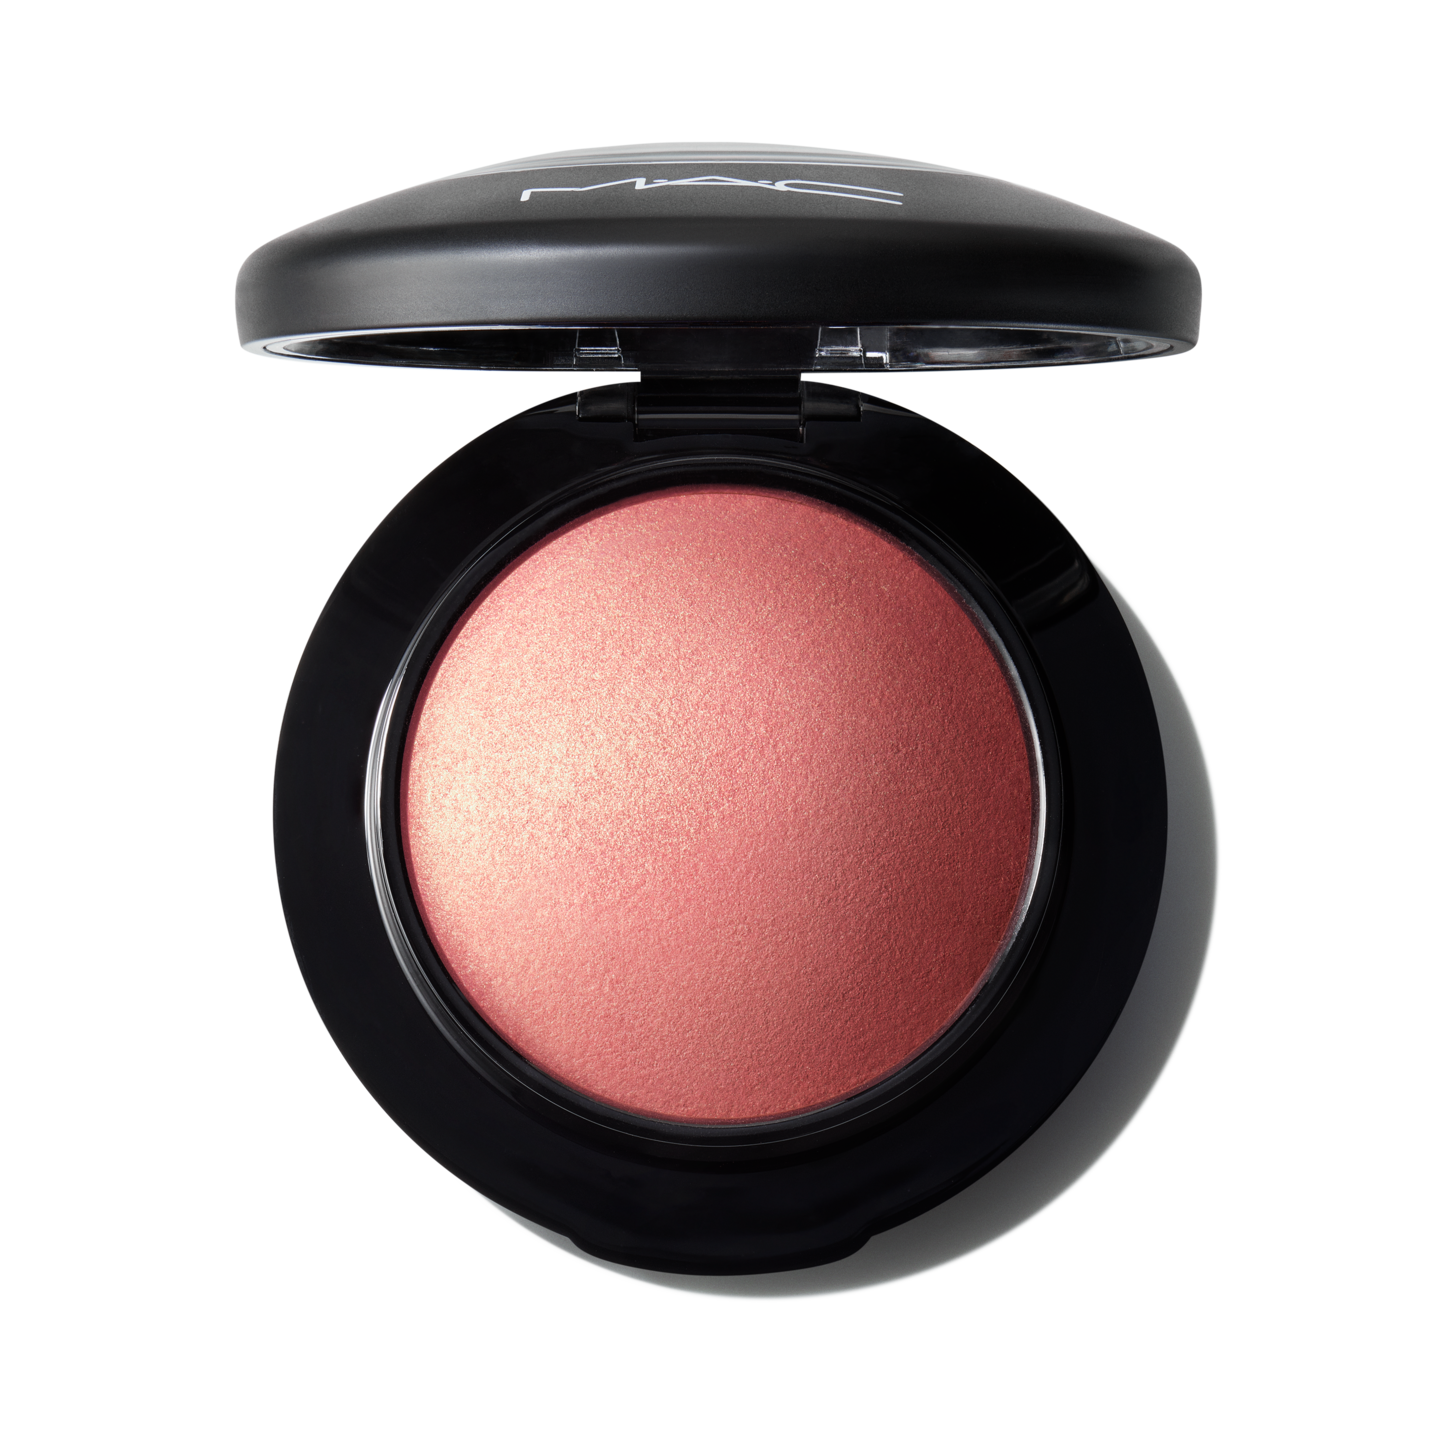 Mineralize Blush – Baked Mineral Blush, M∙A∙C Cosmetics – Official Site